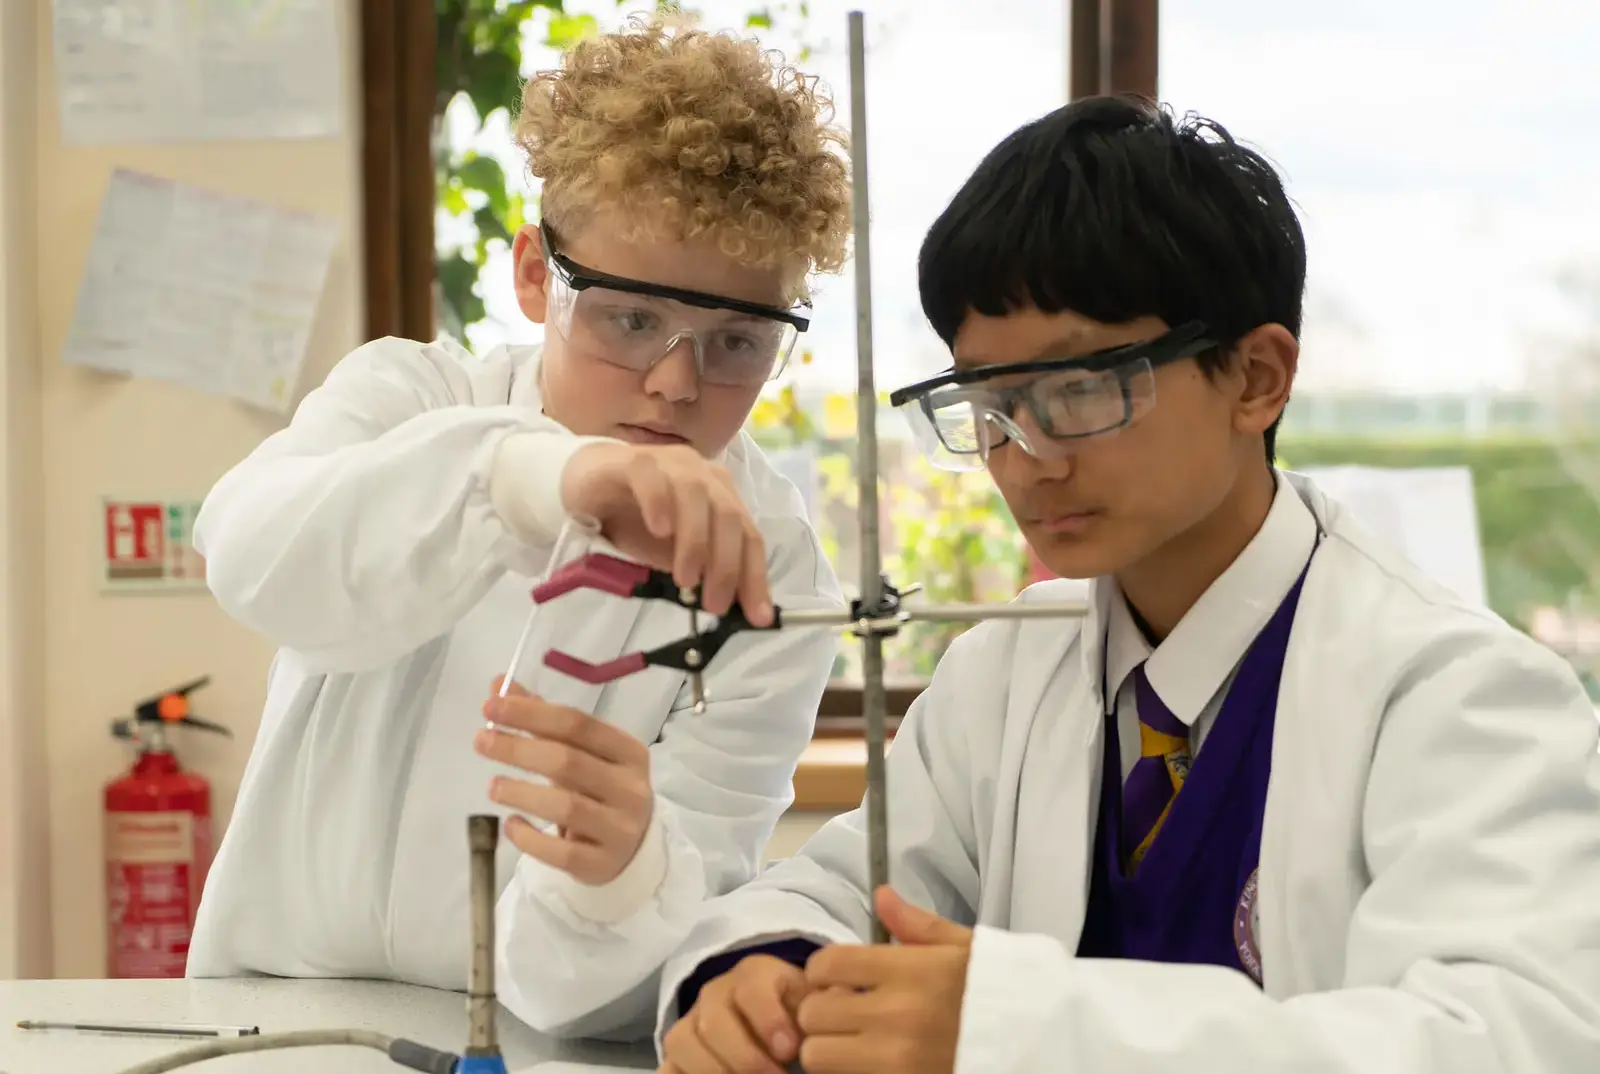 King's Magna pupils in science class